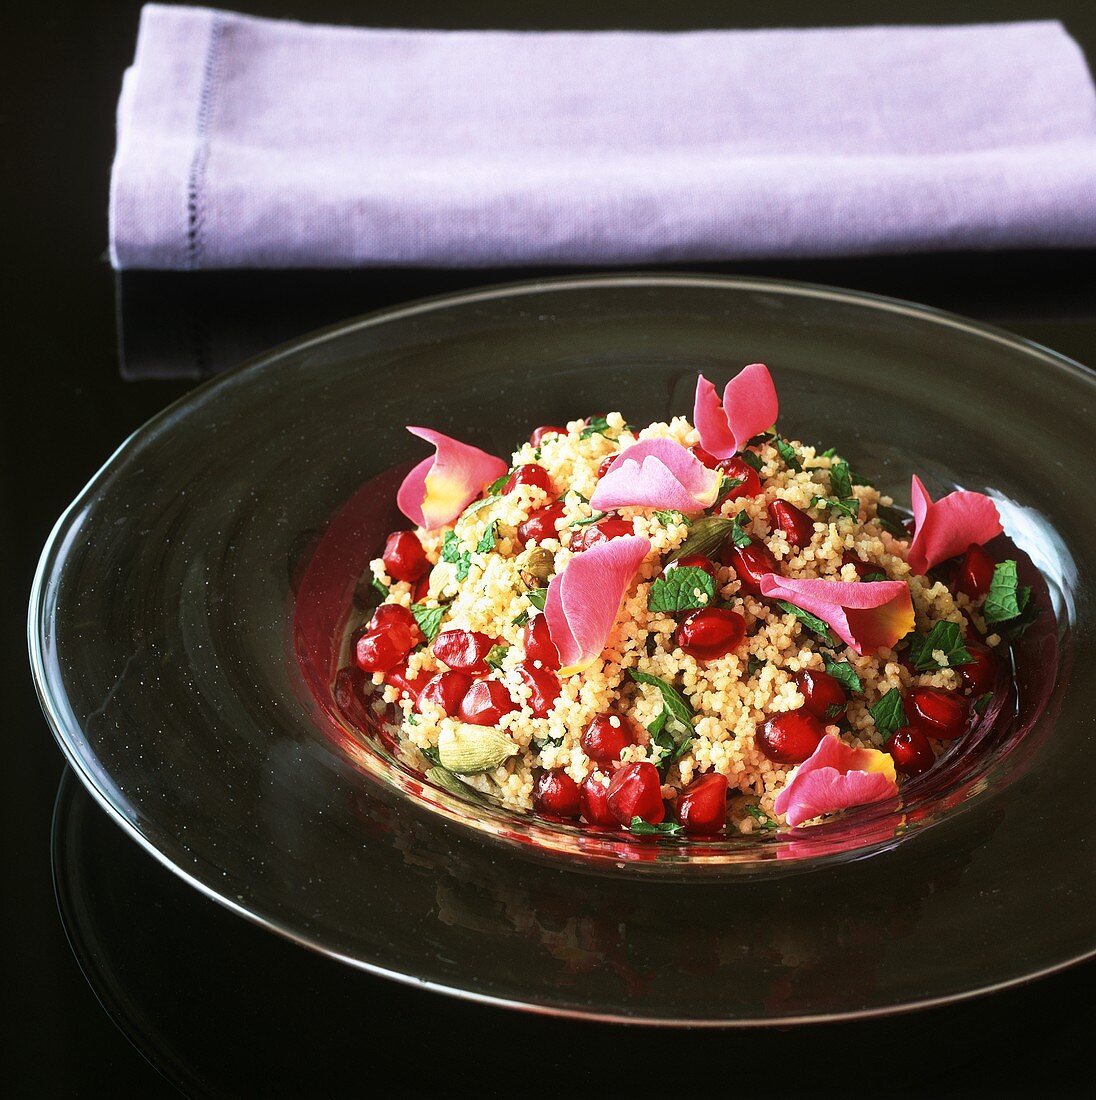 Couscous with pomegranate seeds and rose petals